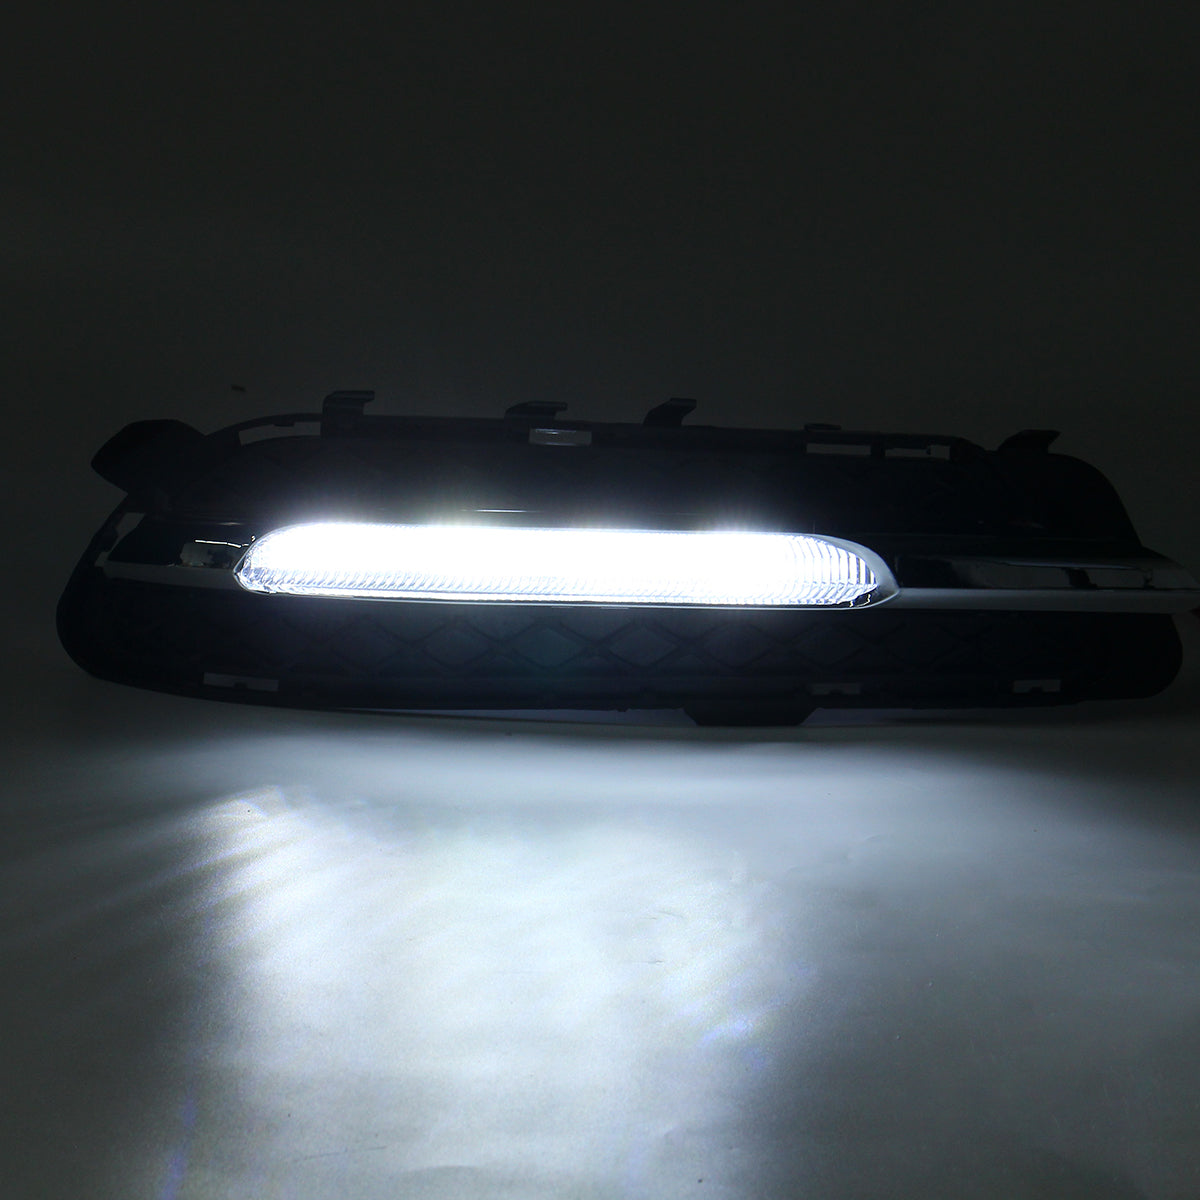 LED DRL Daytime Running Lights with Fog Lamp Cover For Mercedes Benz W212 E-Class E250 E300 E350 2009-2013 - Auto GoShop